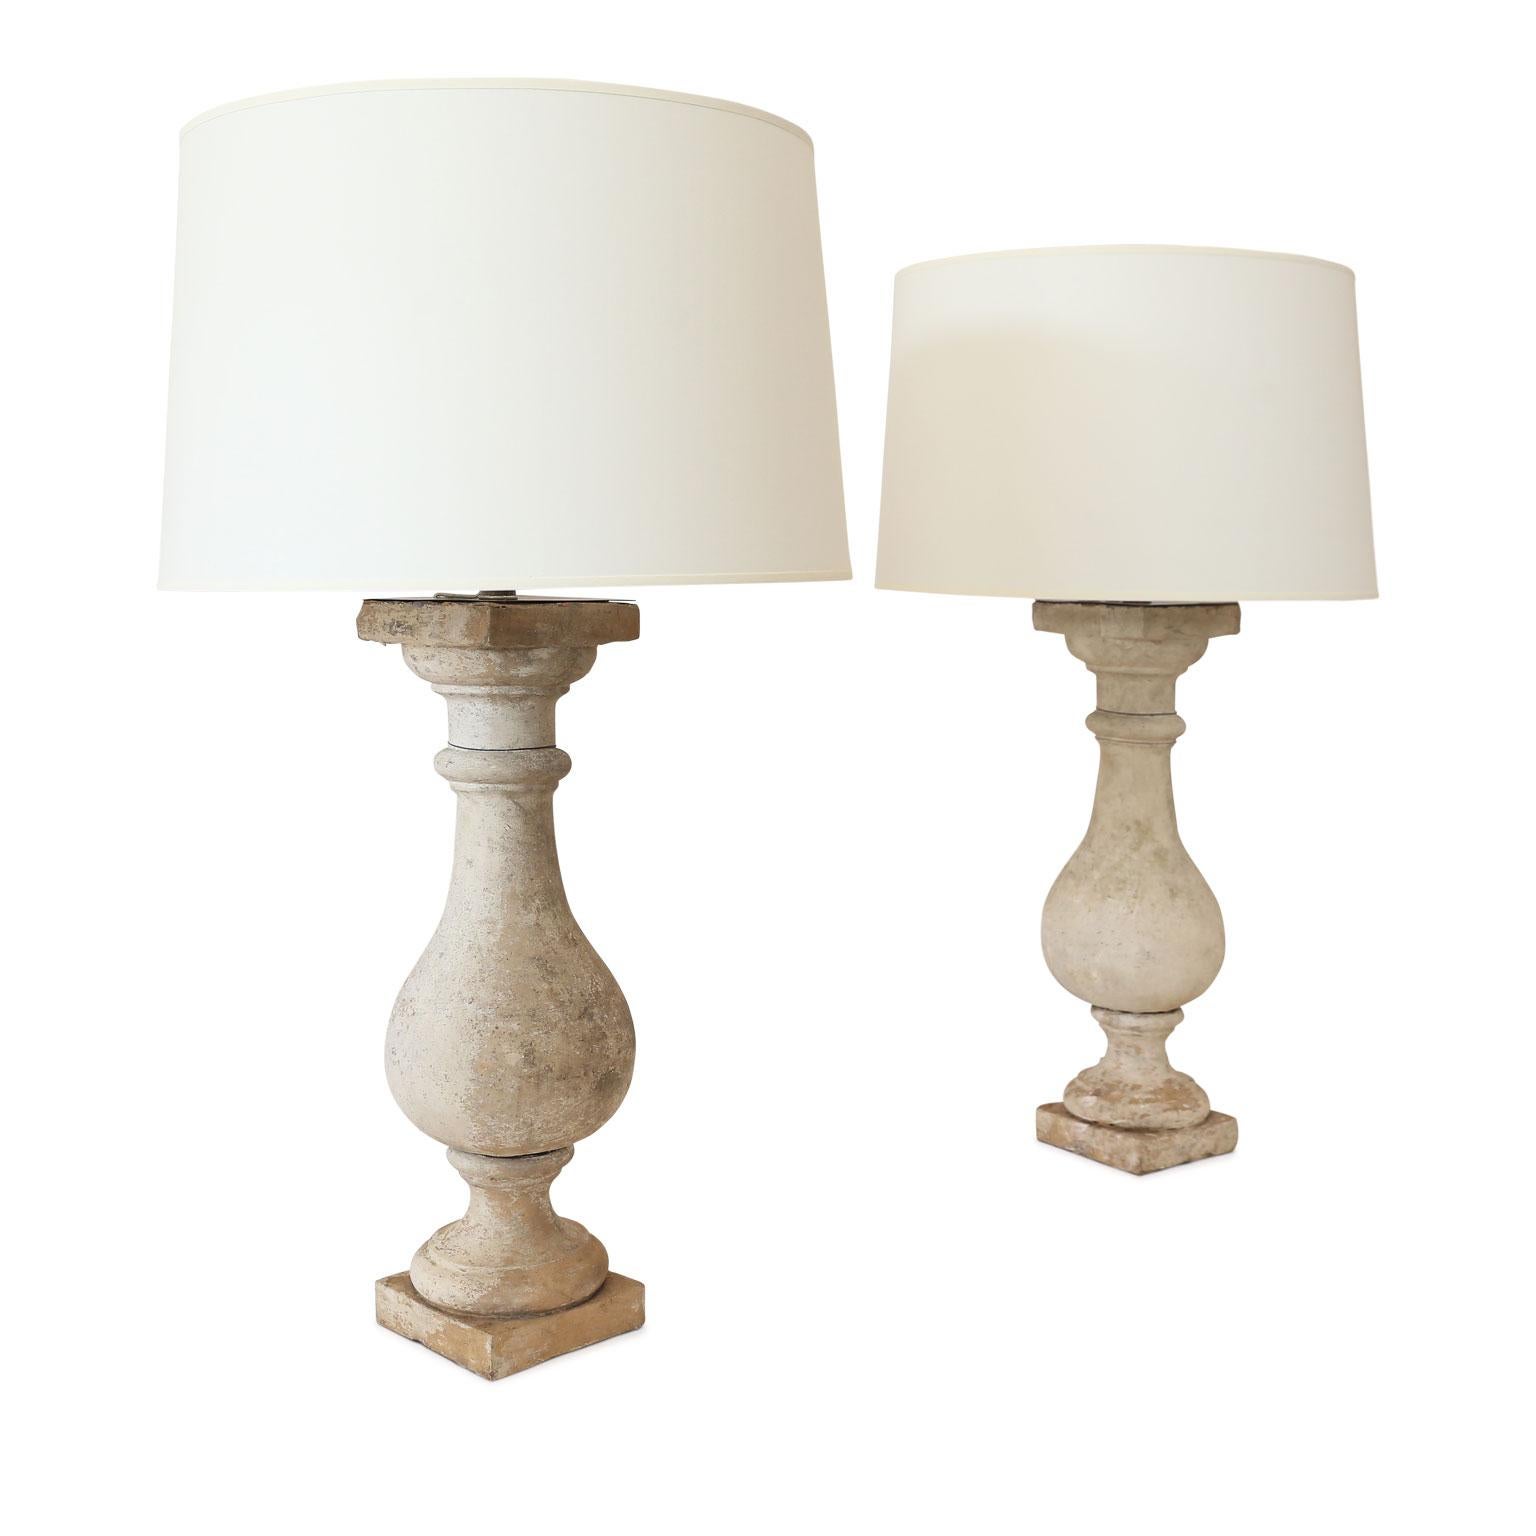 Two custom terracotta lamps from antique terracotta balusters, newly-wired for use within the USA. Complementary fabric hard-back drum shades included (measurements include shades).